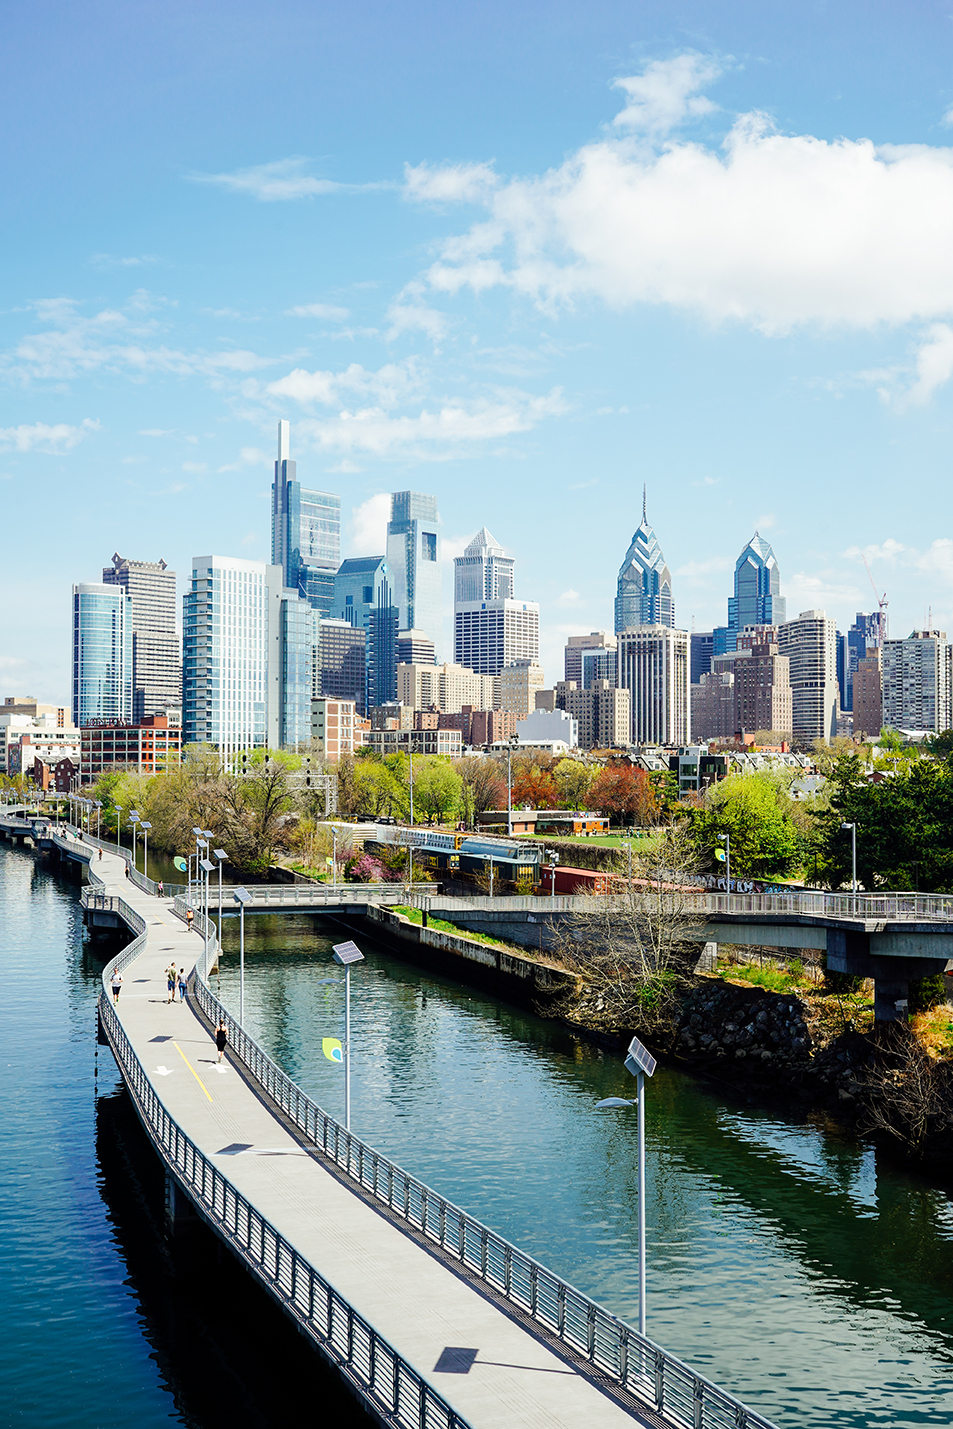 Elevated skyline view of Philadelphia with the Schuylkill river in the foreground and the city in the background